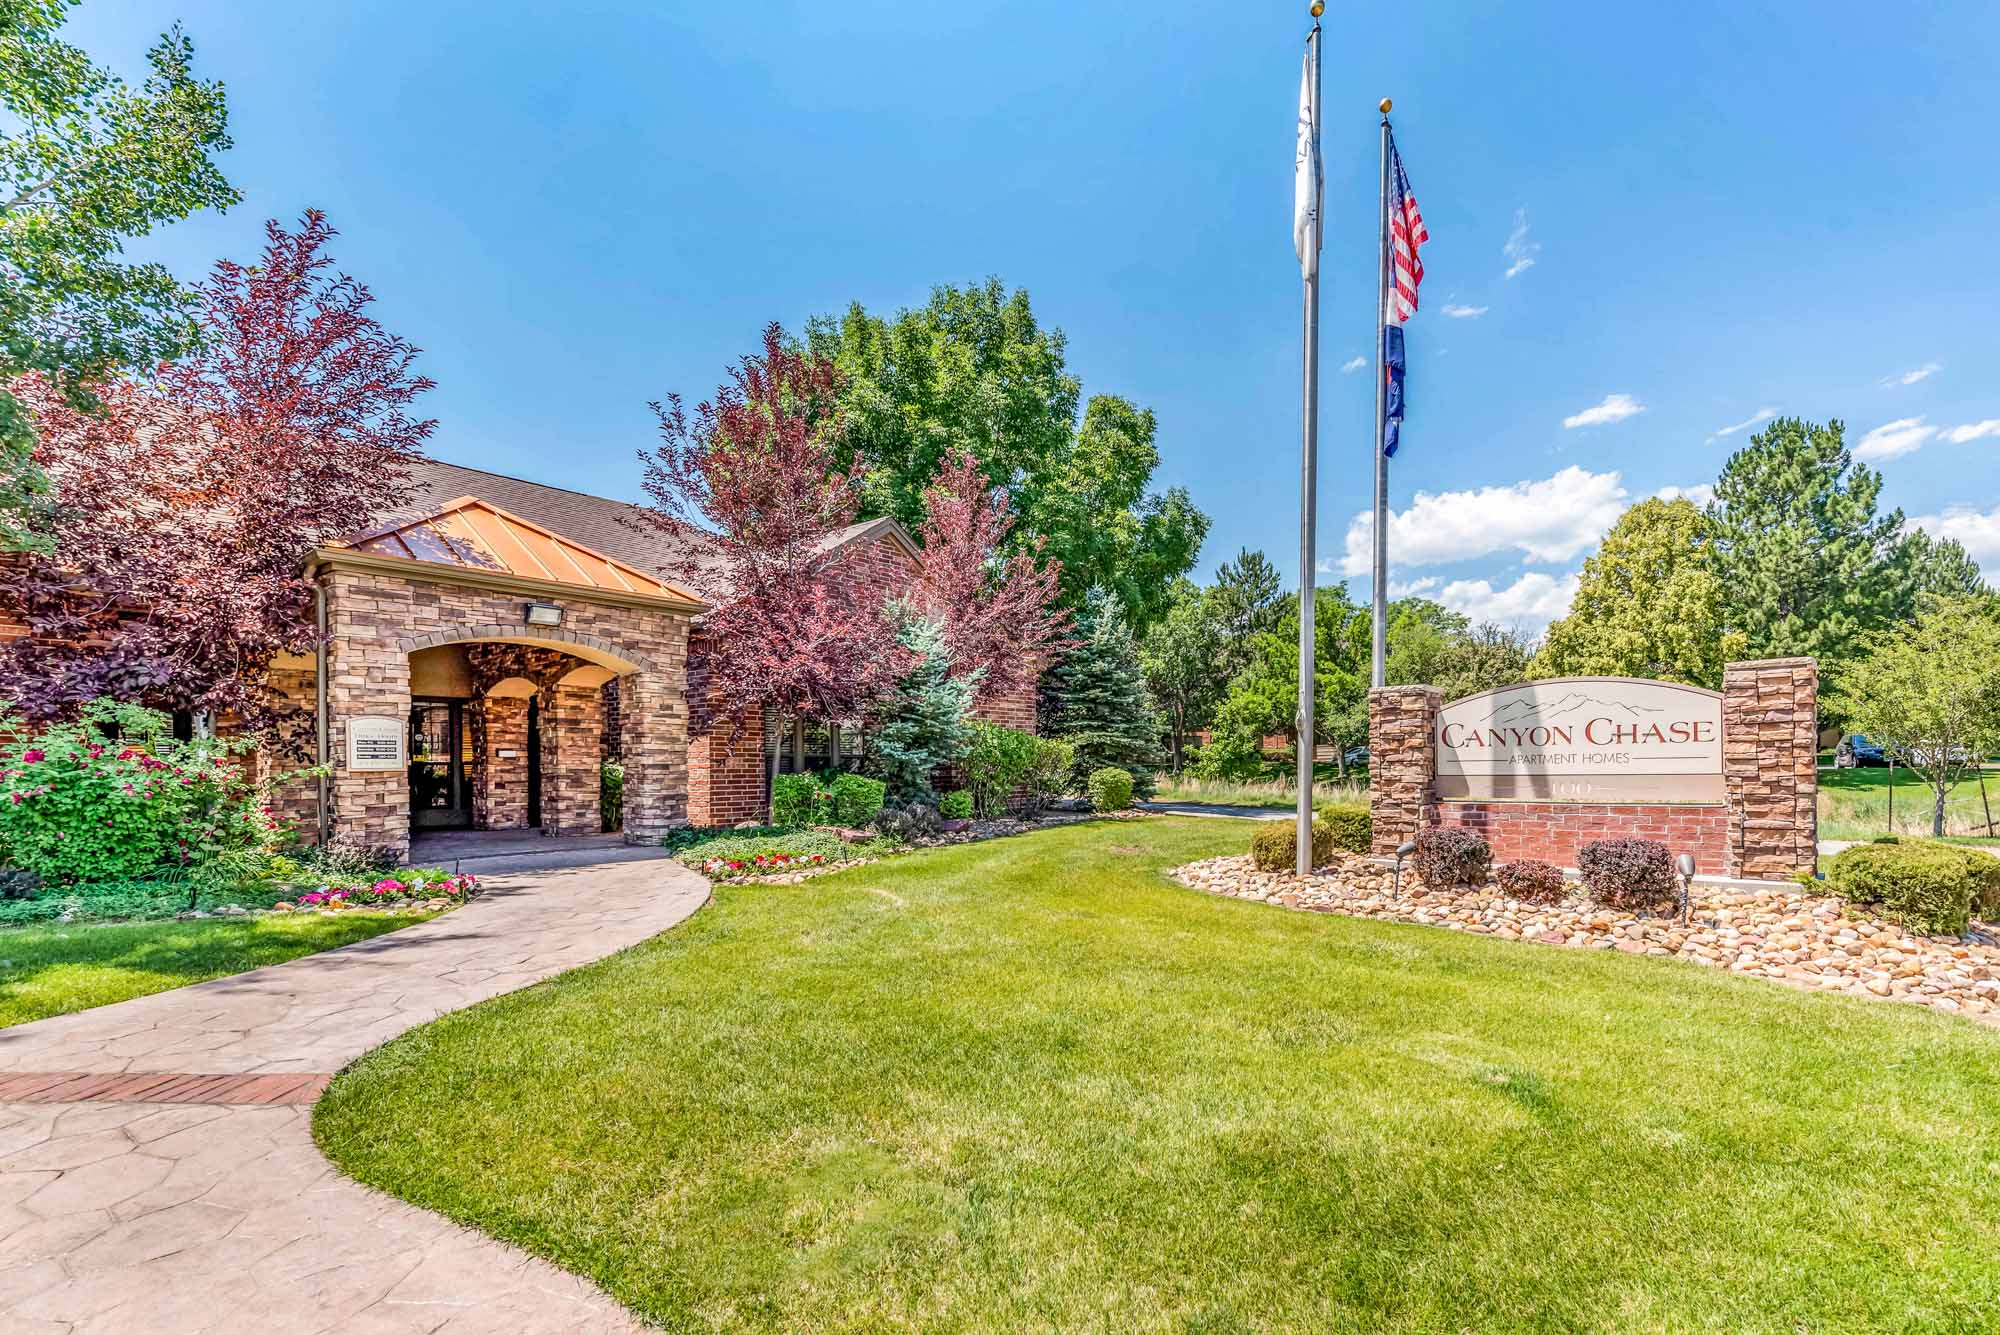 The entrance at Canyon Chase apartments in Westminster, CO.